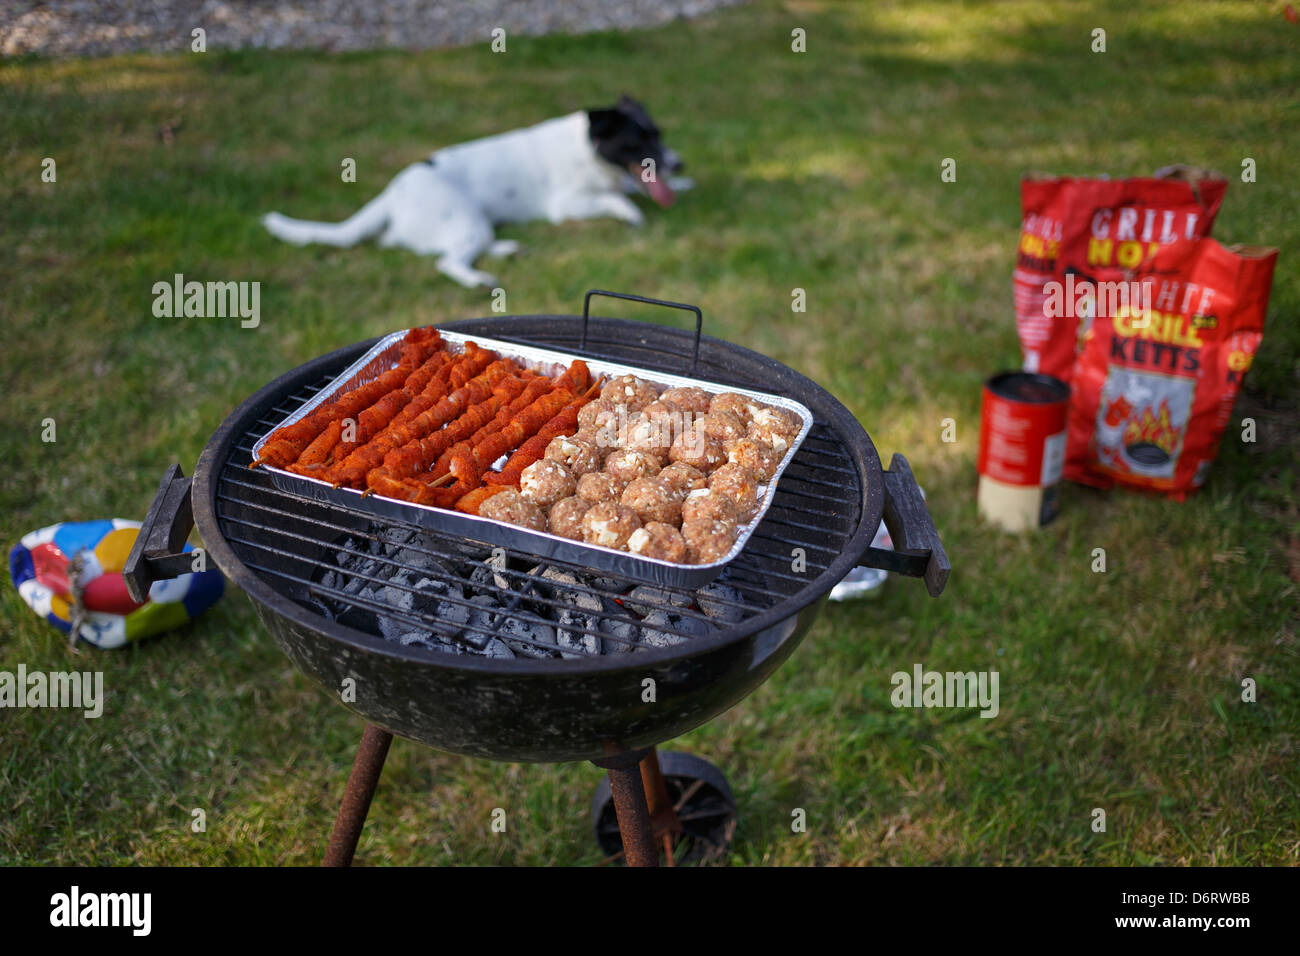 Emden, Germany, on a charcoal grill in a foil dish are meat and Hackbaellchen torches Stock Photo